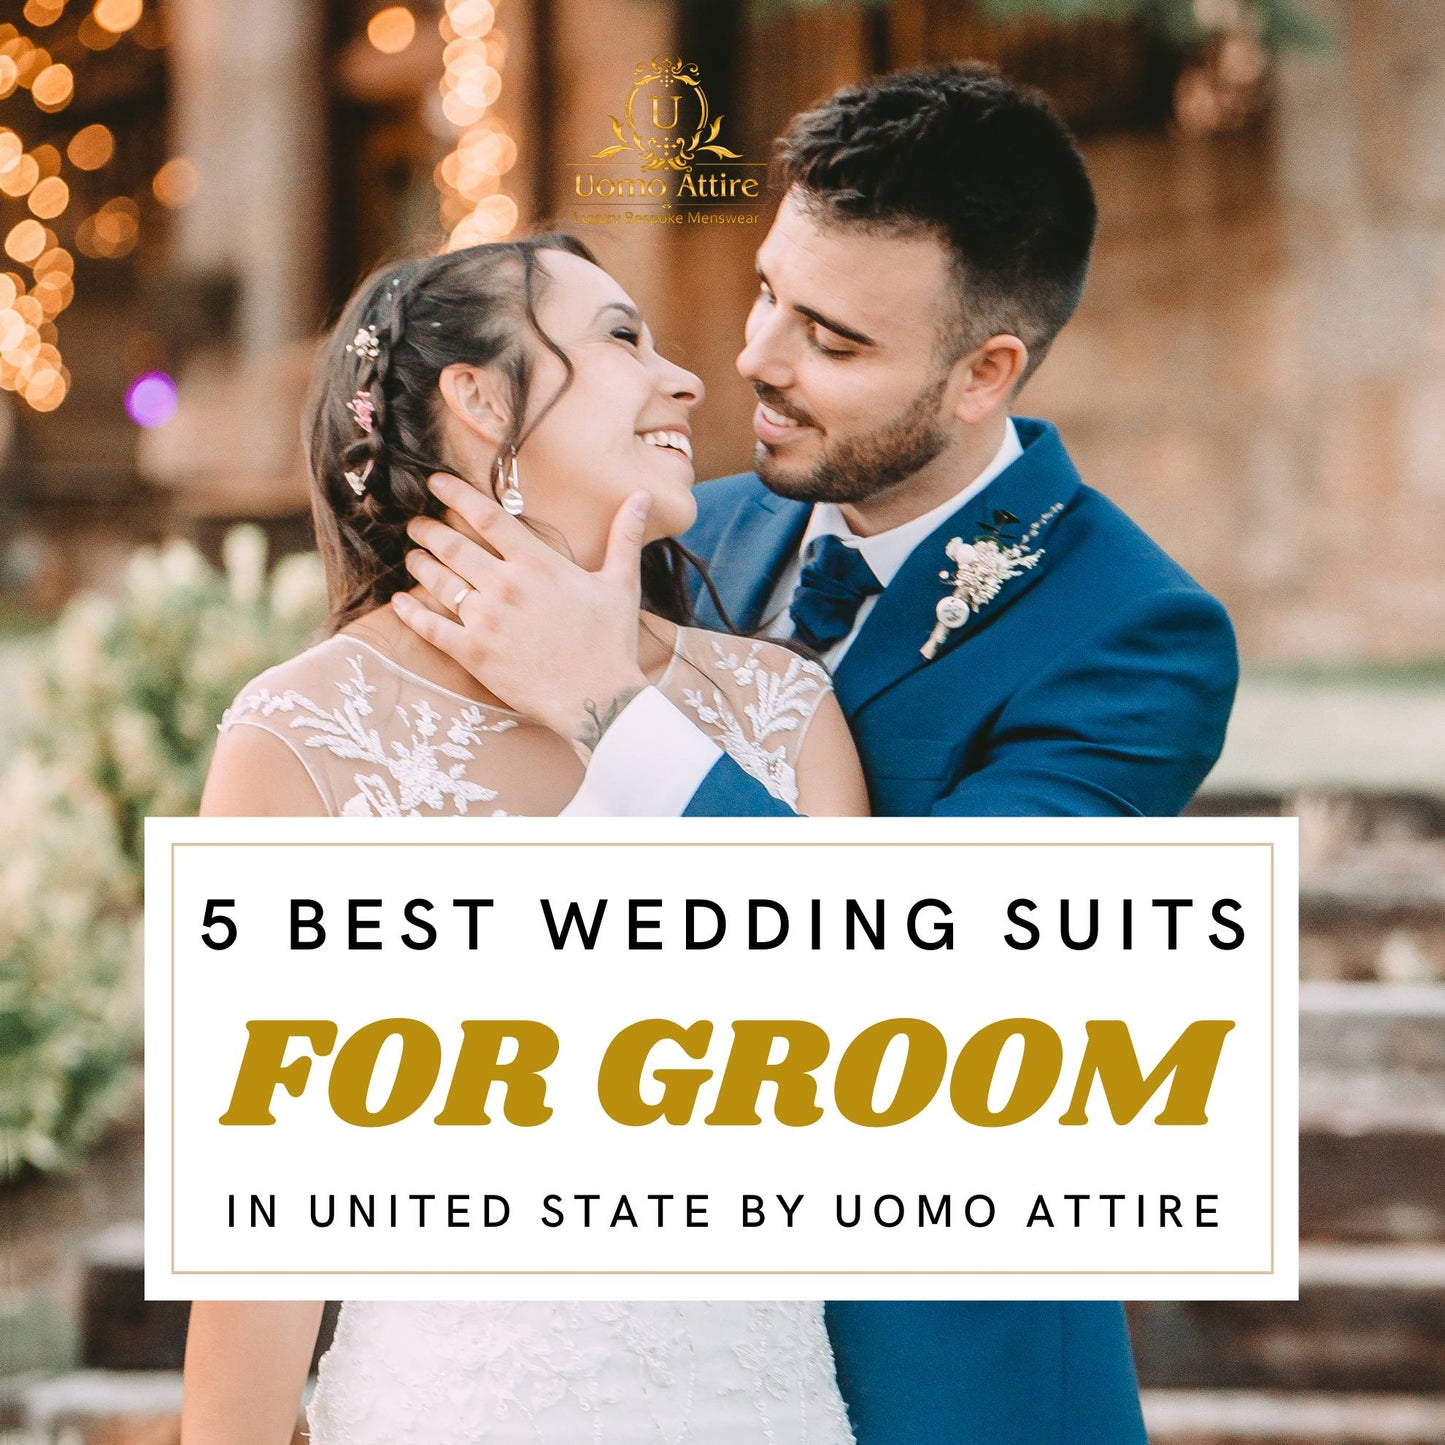 Best wedding suits for groom in United States